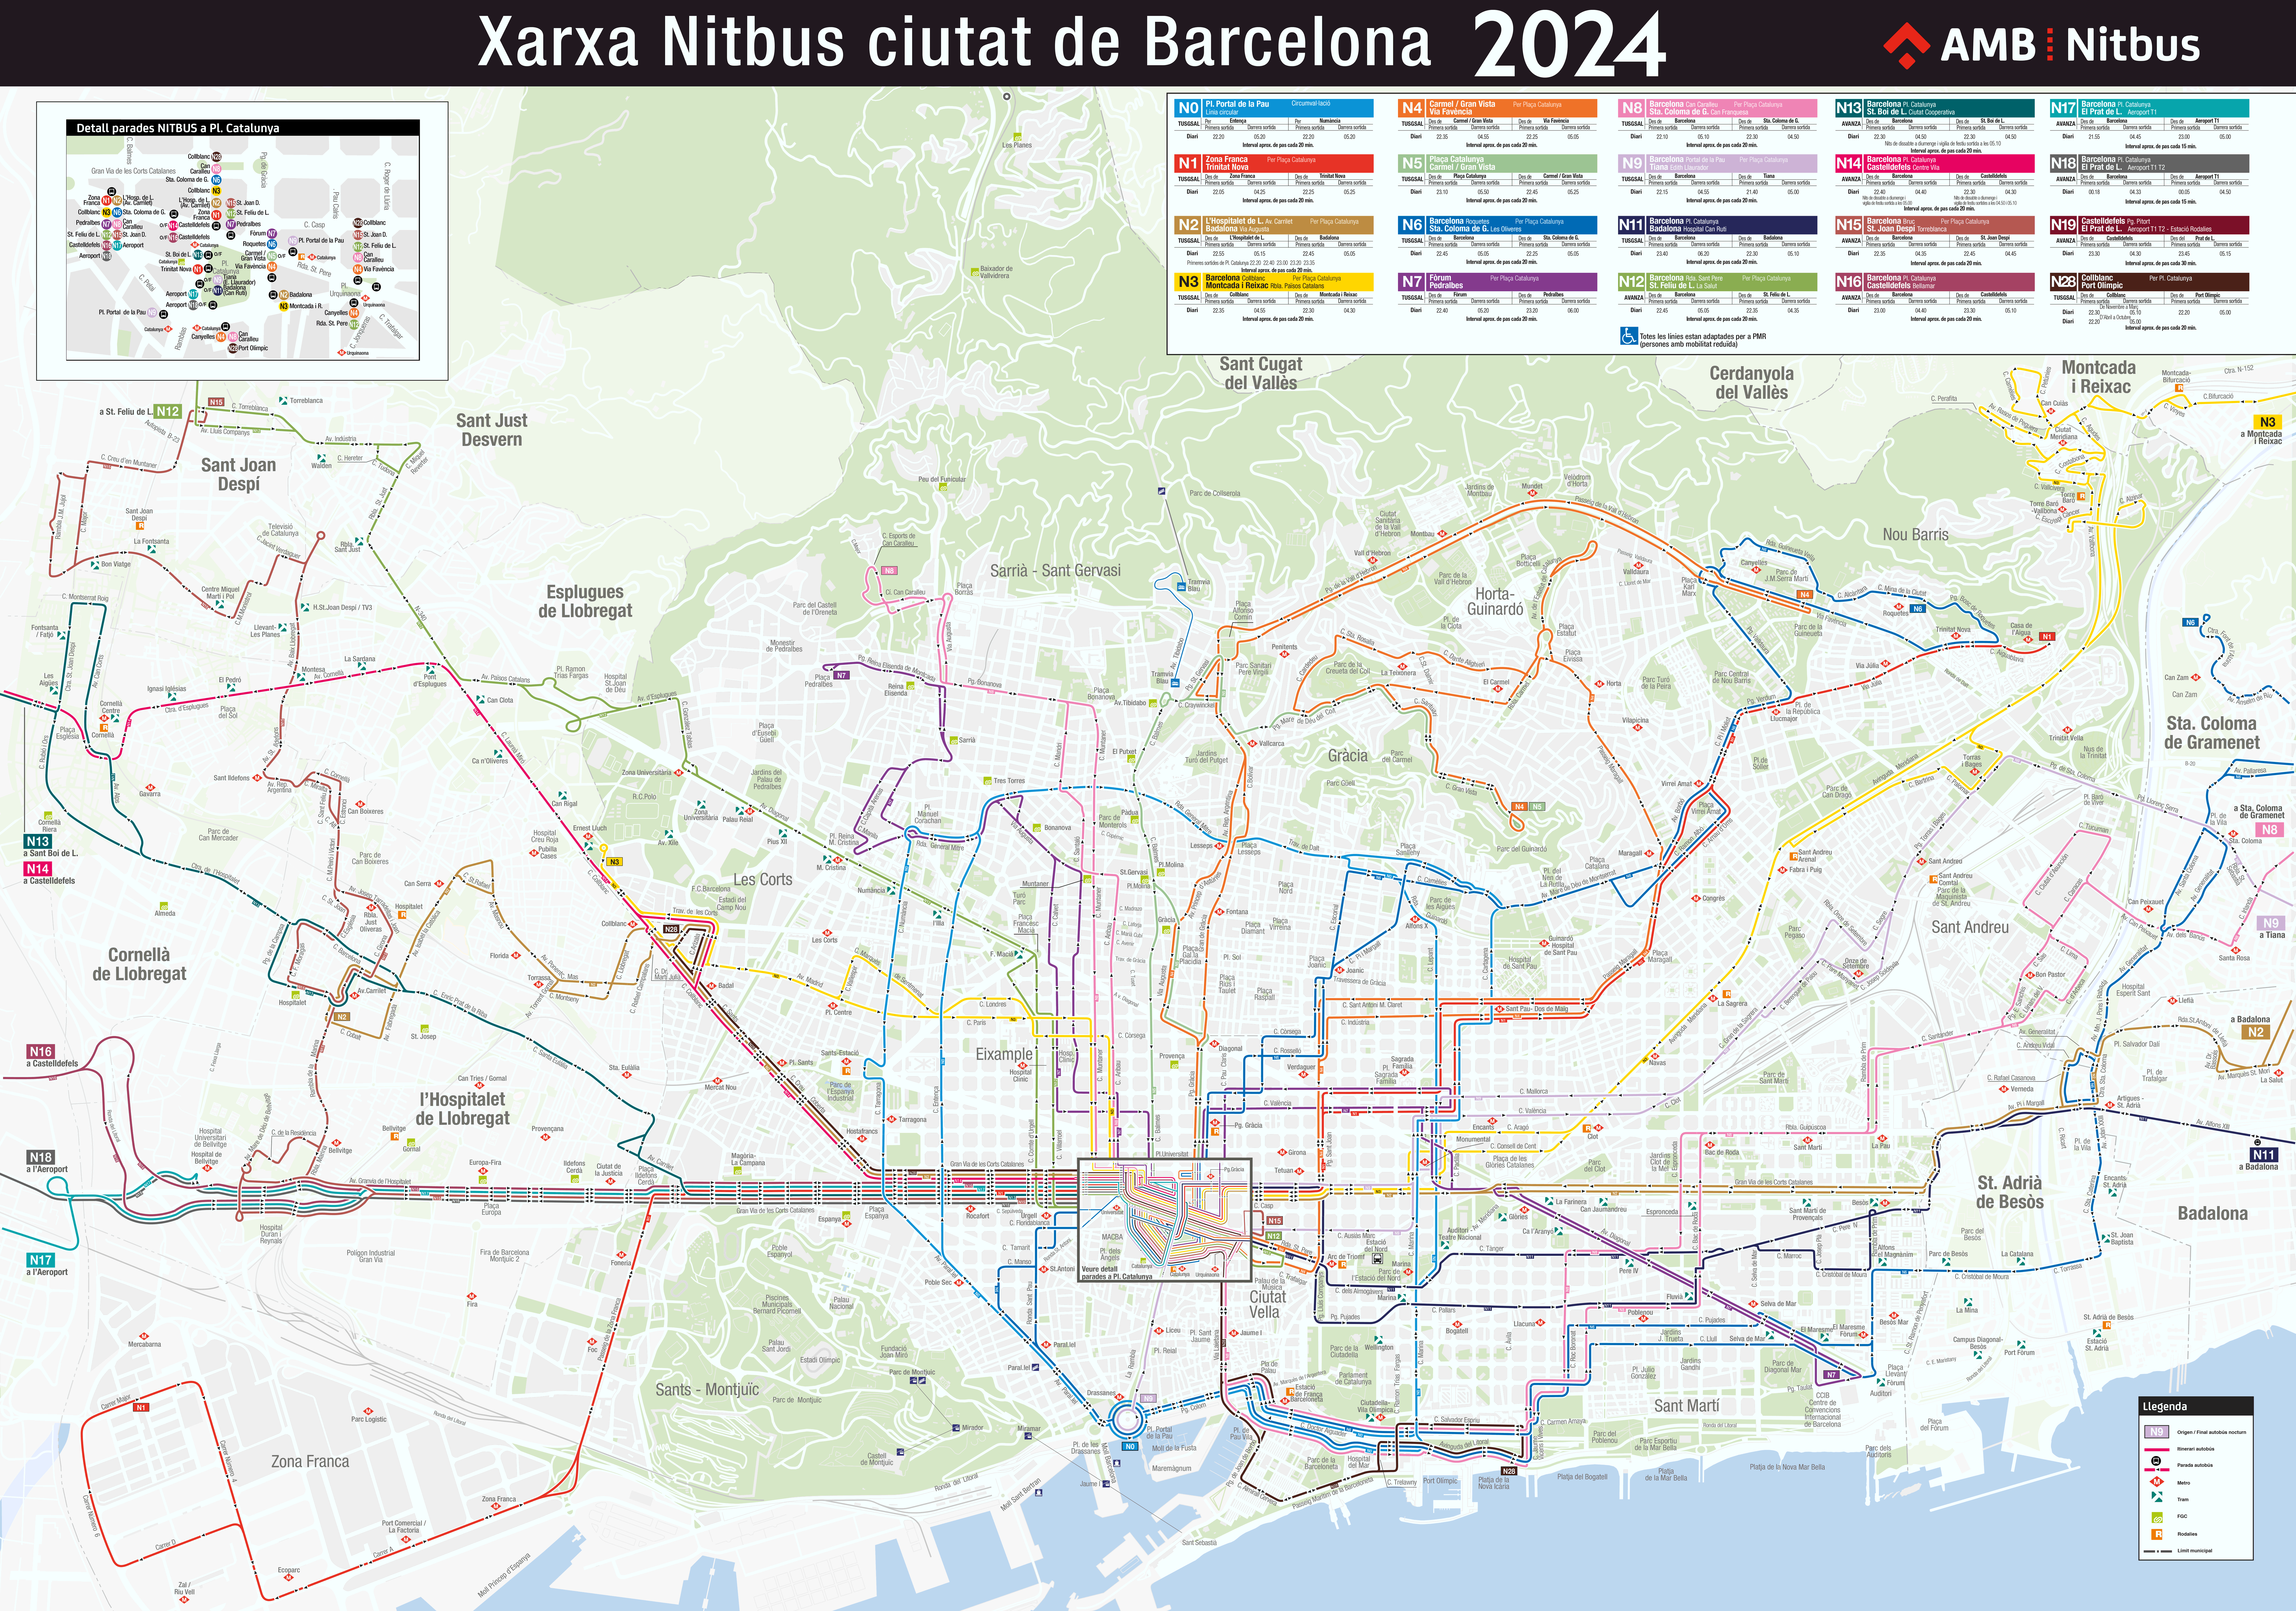 Night bus map of Barcelona (Nit Bus)